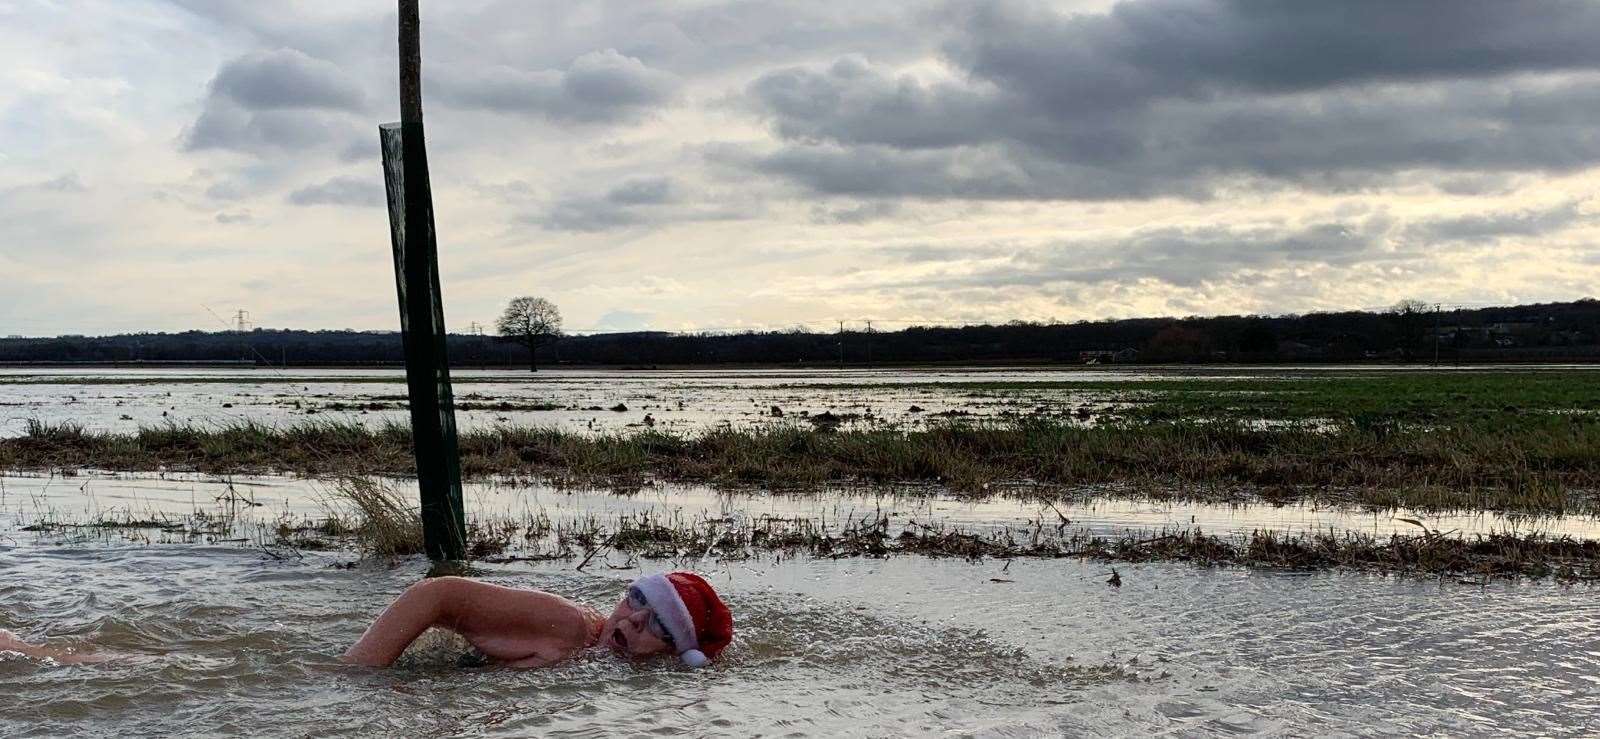 Jackie Cobell, a Capel resident, swam in flood water on Hartlake Road to highlight the flood risk